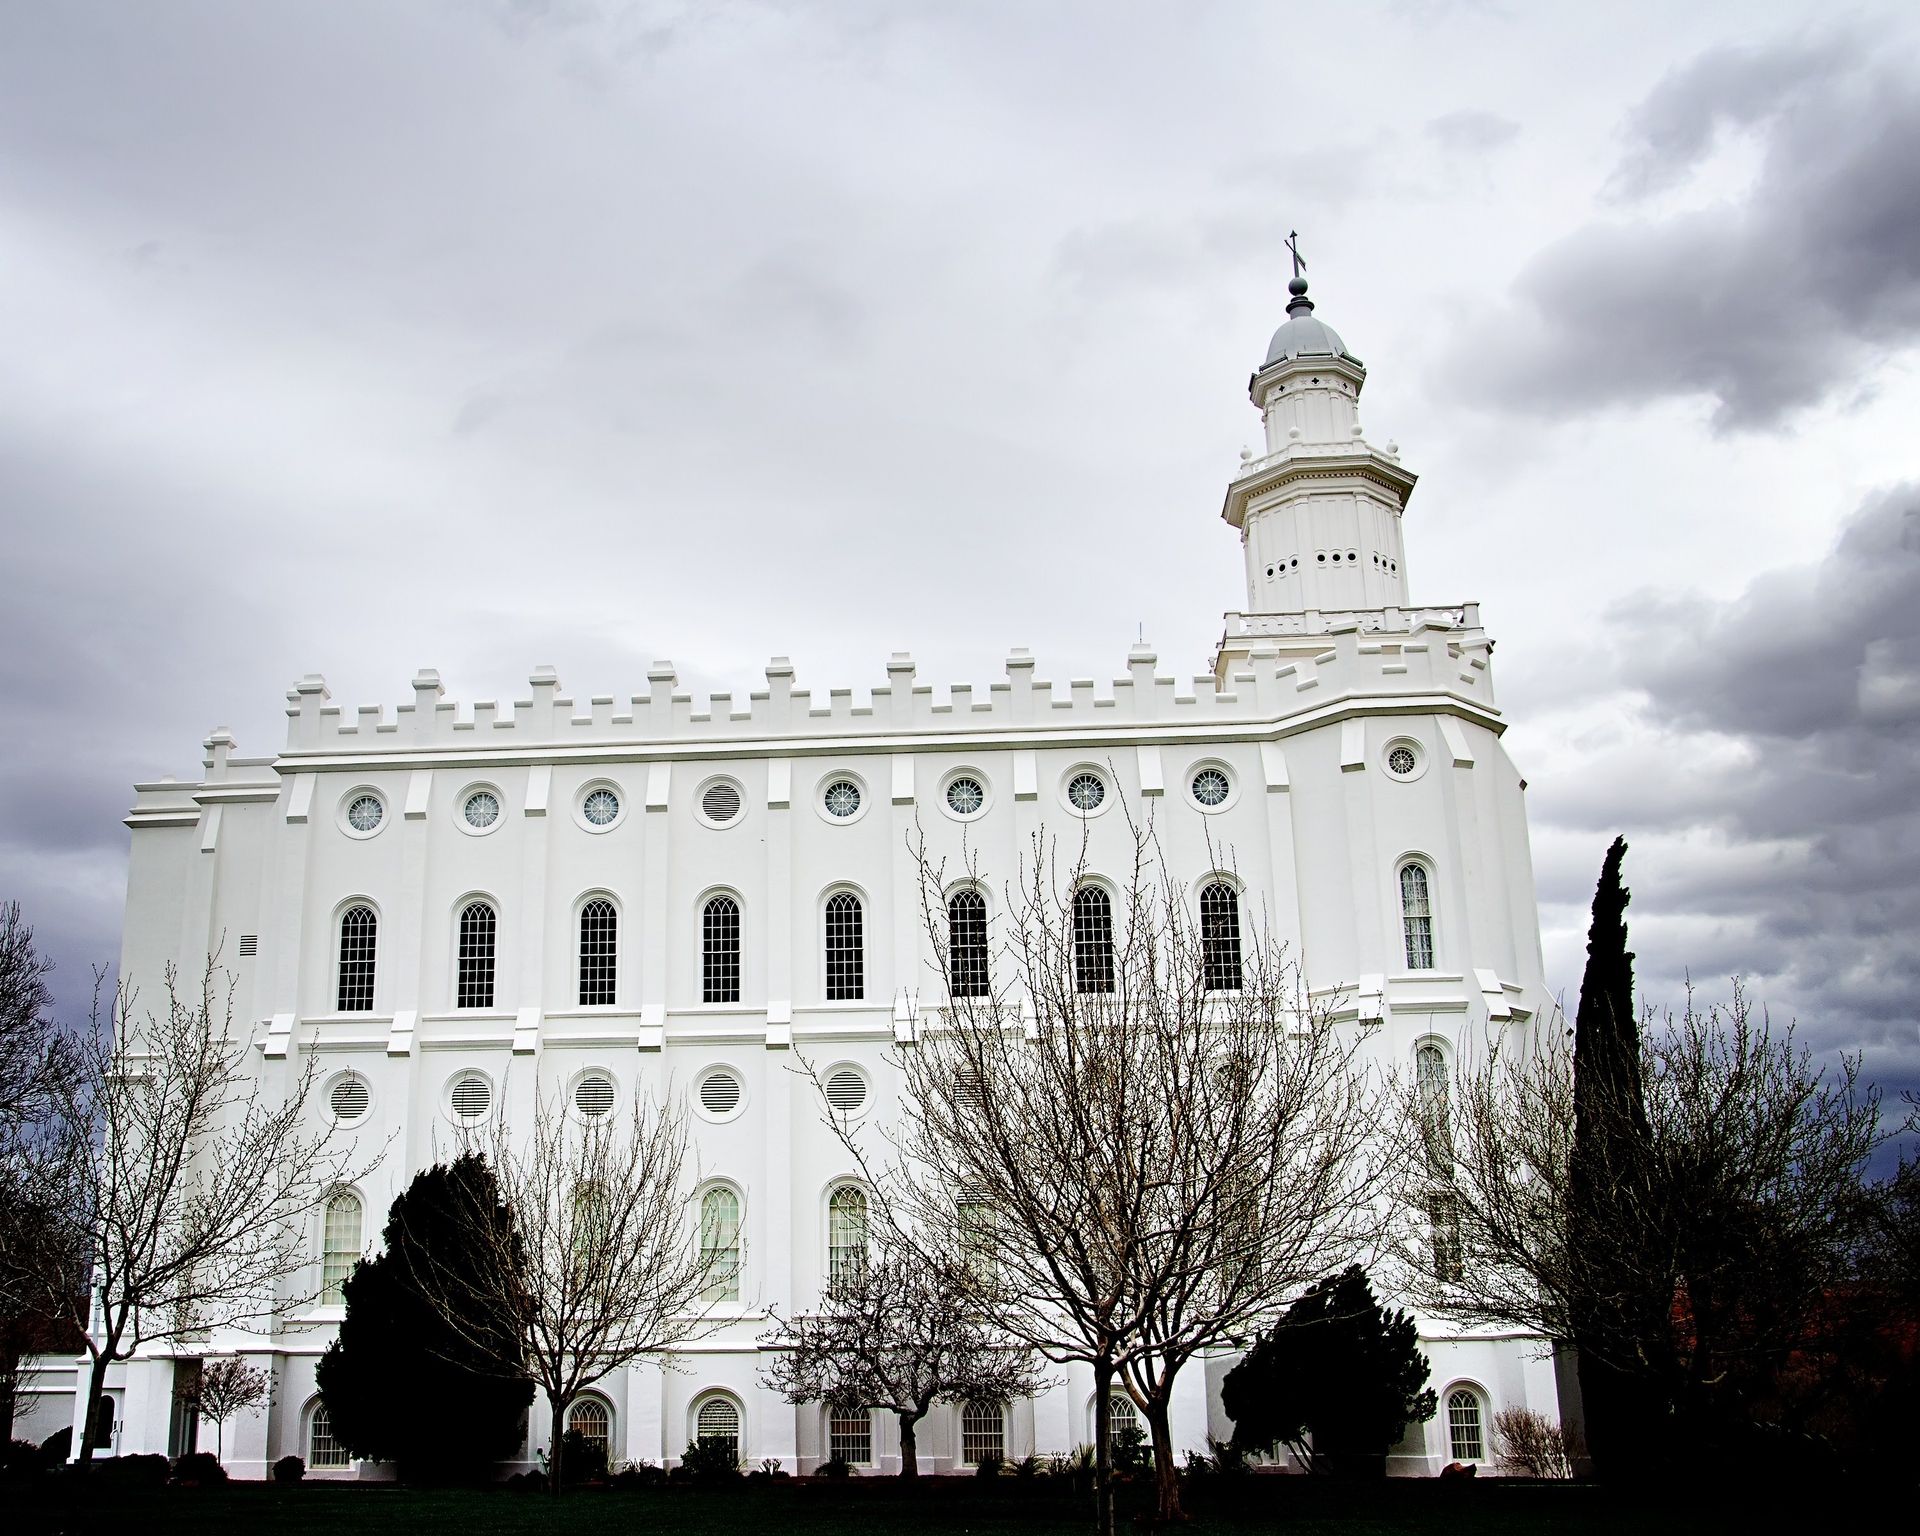 A south view of the St. George Utah Temple in the daytime, including scenery.